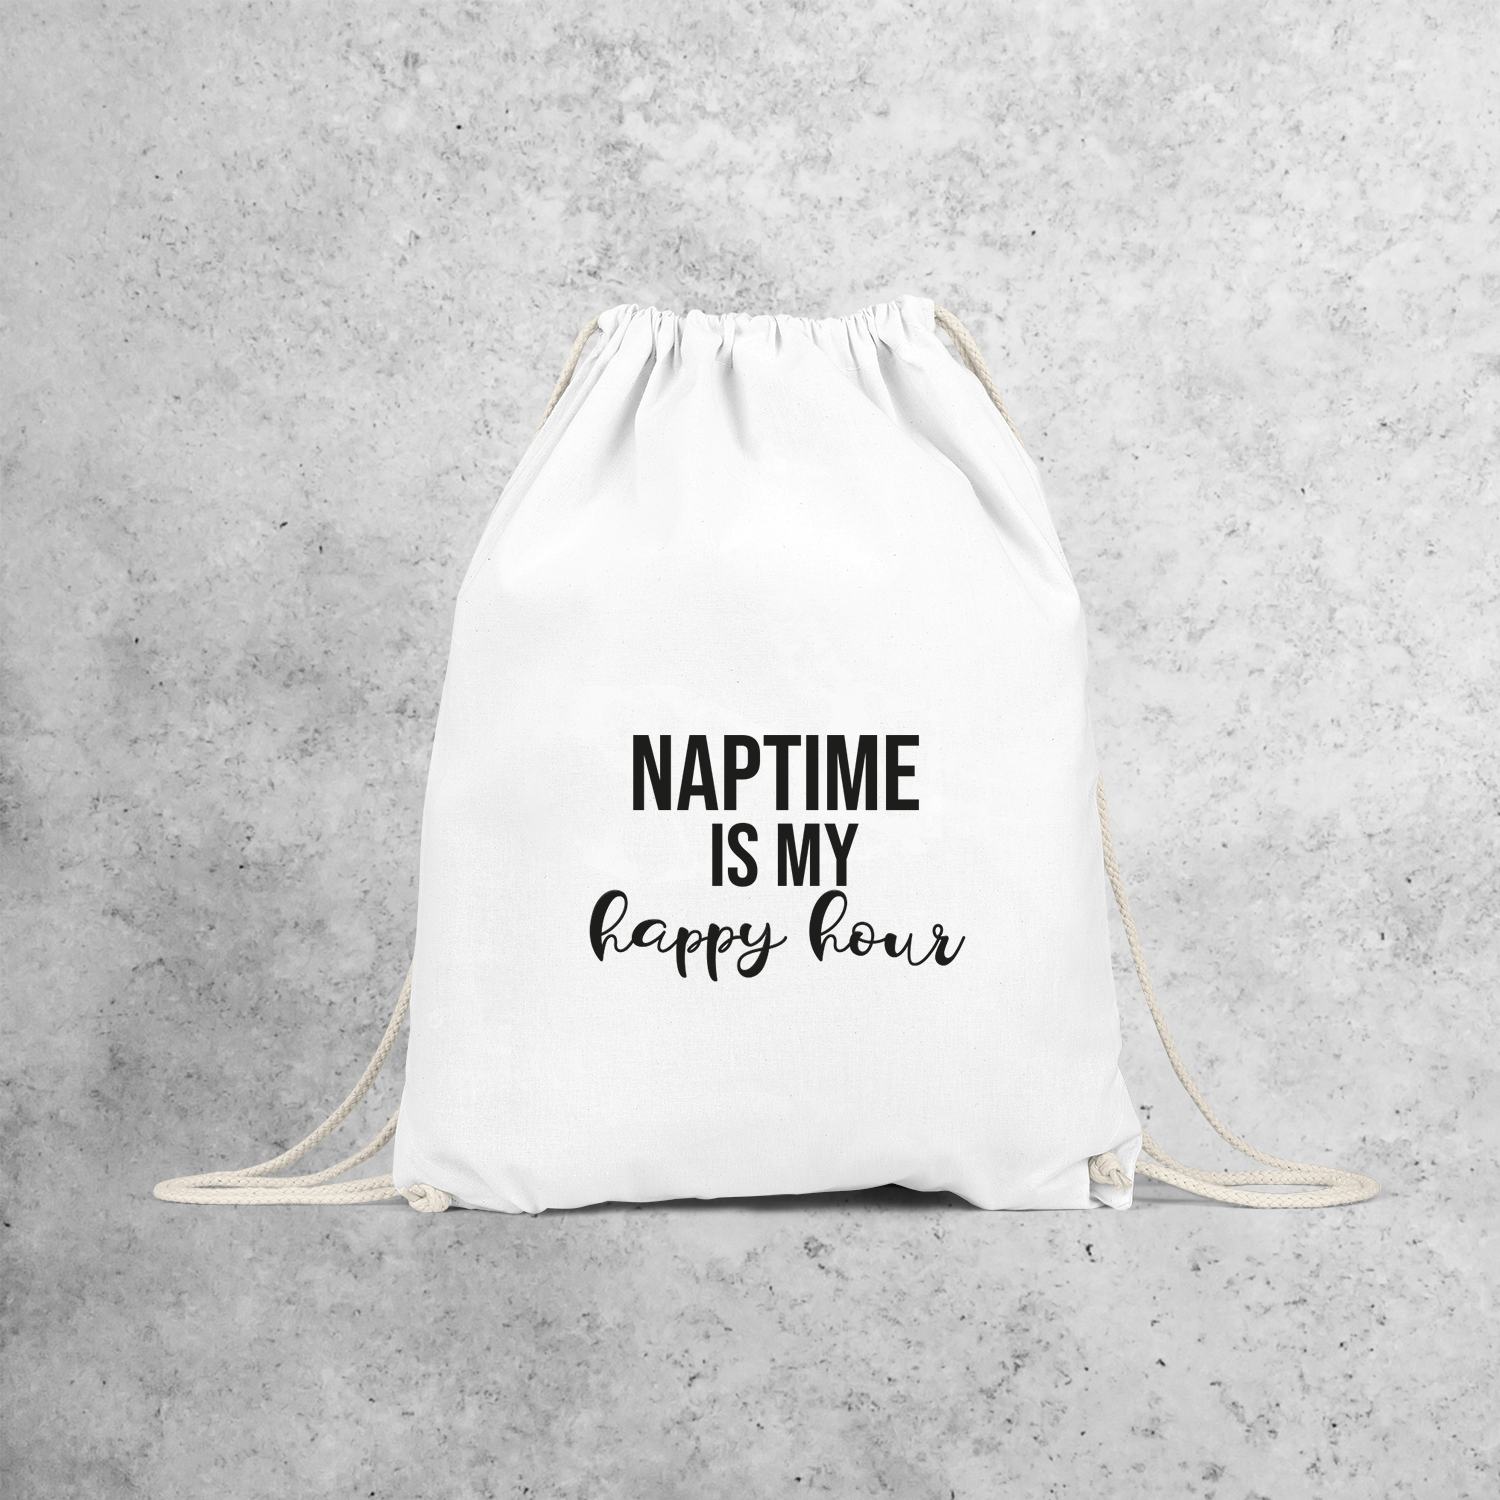 'Naptime is my happy hour' backpack